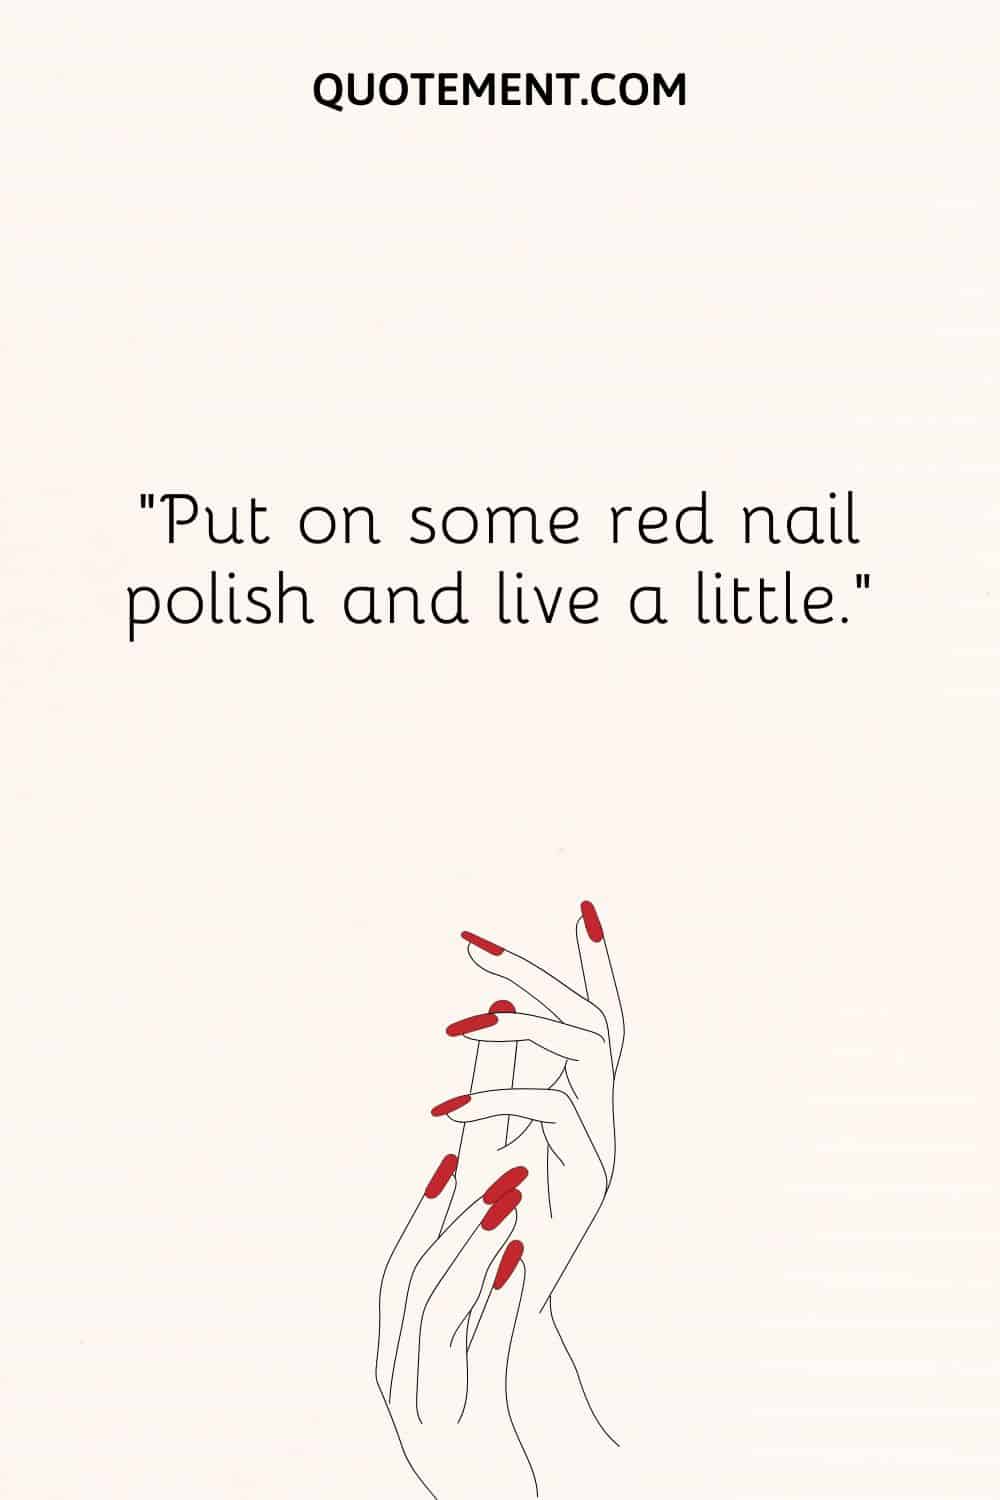 Put on some red nail polish and live a little